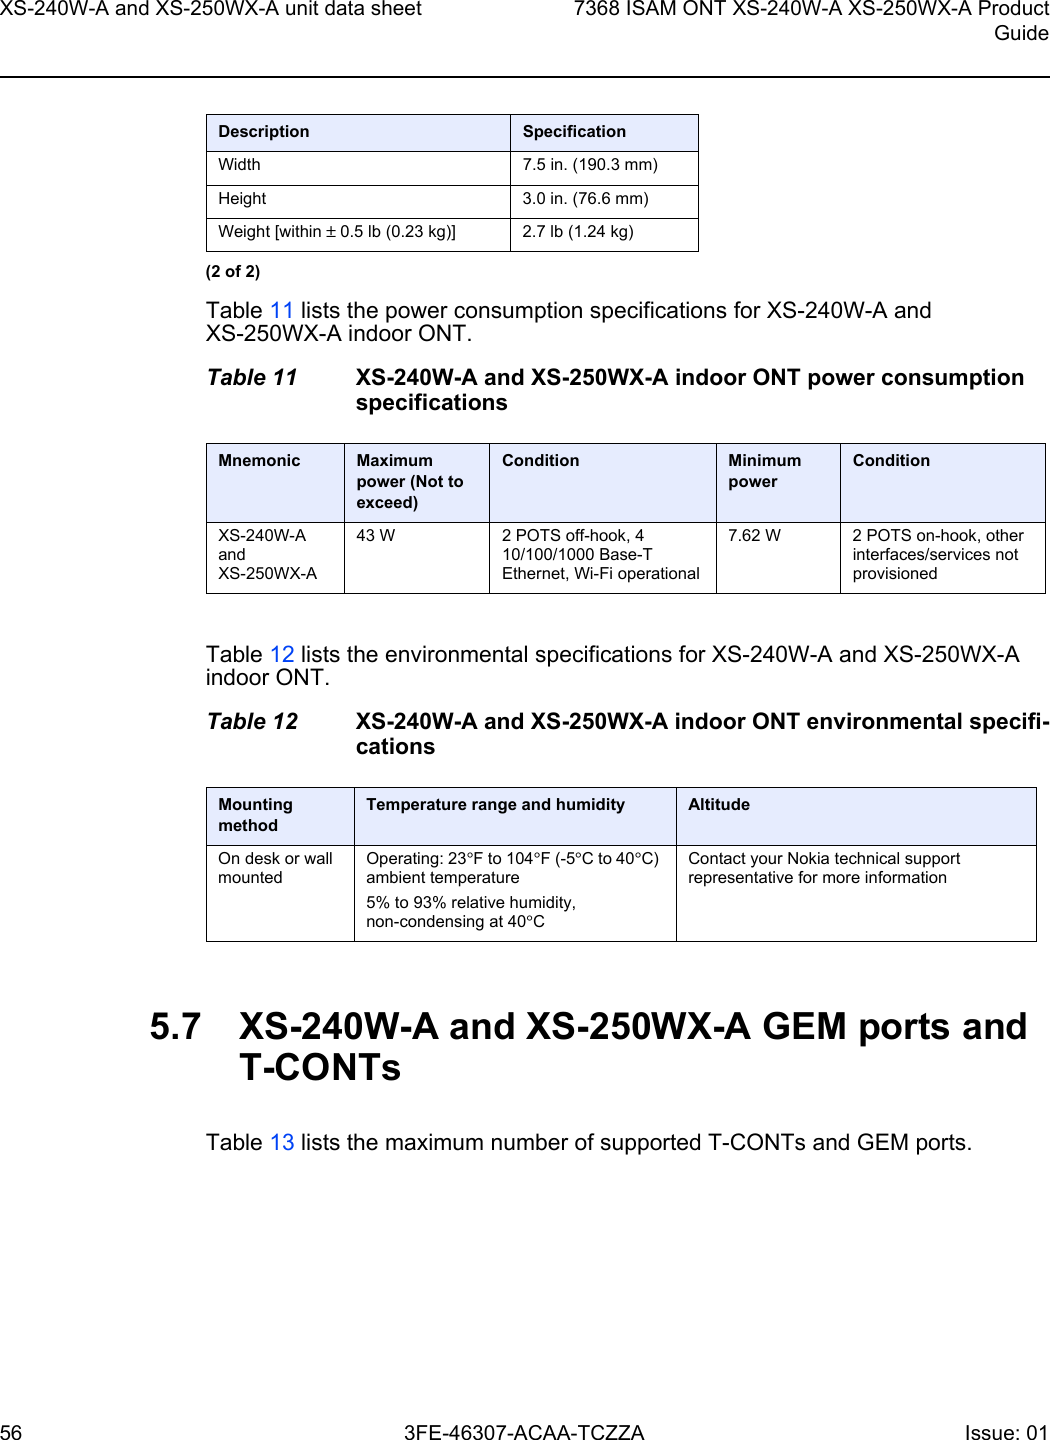 XS-240W-A and XS-250WX-A unit data sheet567368 ISAM ONT XS-240W-A XS-250WX-A ProductGuide3FE-46307-ACAA-TCZZA Issue: 01 Table 11 lists the power consumption specifications for XS-240W-A and XS-250WX-A indoor ONT.Table 11 XS-240W-A and XS-250WX-A indoor ONT power consumption specificationsTable 12 lists the environmental specifications for XS-240W-A and XS-250WX-A indoor ONT.Table 12 XS-240W-A and XS-250WX-A indoor ONT environmental specifi-cations5.7 XS-240W-A and XS-250WX-A GEM ports and T-CONTsTable 13 lists the maximum number of supported T-CONTs and GEM ports. Width 7.5 in. (190.3 mm)Height 3.0 in. (76.6 mm)Weight [within ± 0.5 lb (0.23 kg)] 2.7 lb (1.24 kg)Mnemonic Maximum power (Not to exceed)Condition Minimum powerConditionXS-240W-A and XS-250WX-A 43 W 2 POTS off-hook, 4 10/100/1000 Base-T Ethernet, Wi-Fi operational7.62 W 2 POTS on-hook, other interfaces/services not provisionedMounting methodTemperature range and humidity AltitudeOn desk or wall mountedOperating: 23°F to 104°F (-5°C to 40°C) ambient temperature5% to 93% relative humidity, non-condensing at 40°CContact your Nokia technical support representative for more informationDescription Specification(2 of 2)